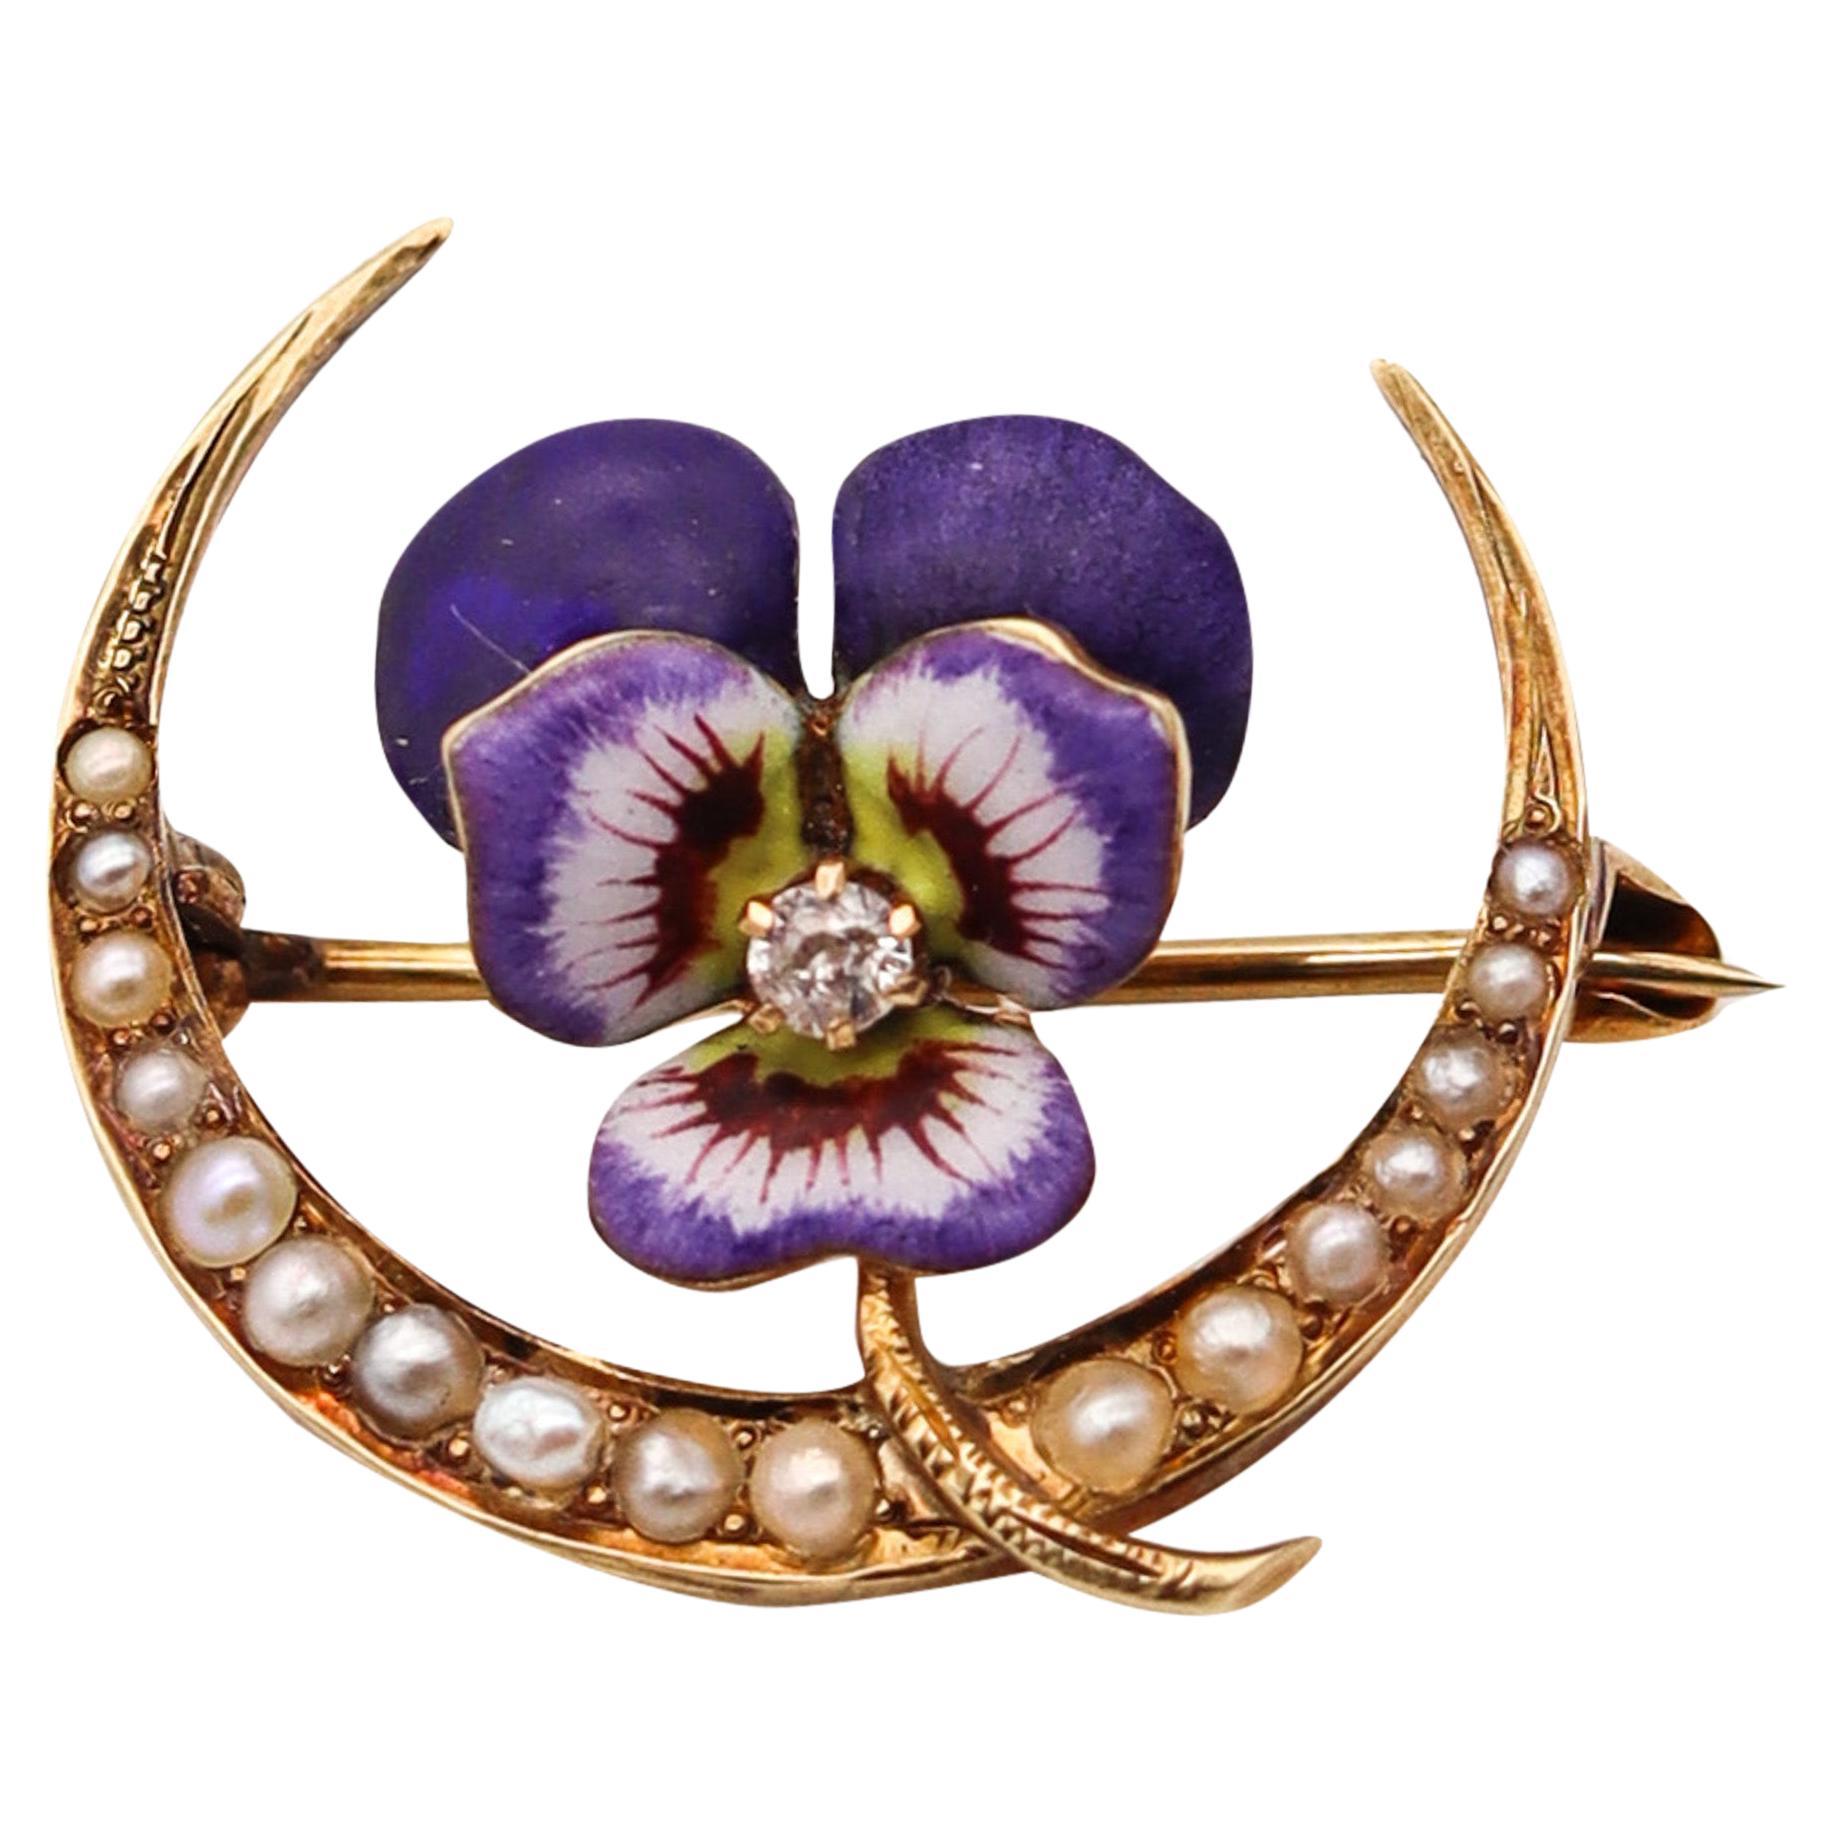 Edwardian 1905 Art Nouveau Pansy Enamel Pin Brooch In 14Kt Gold & Natural Pearls